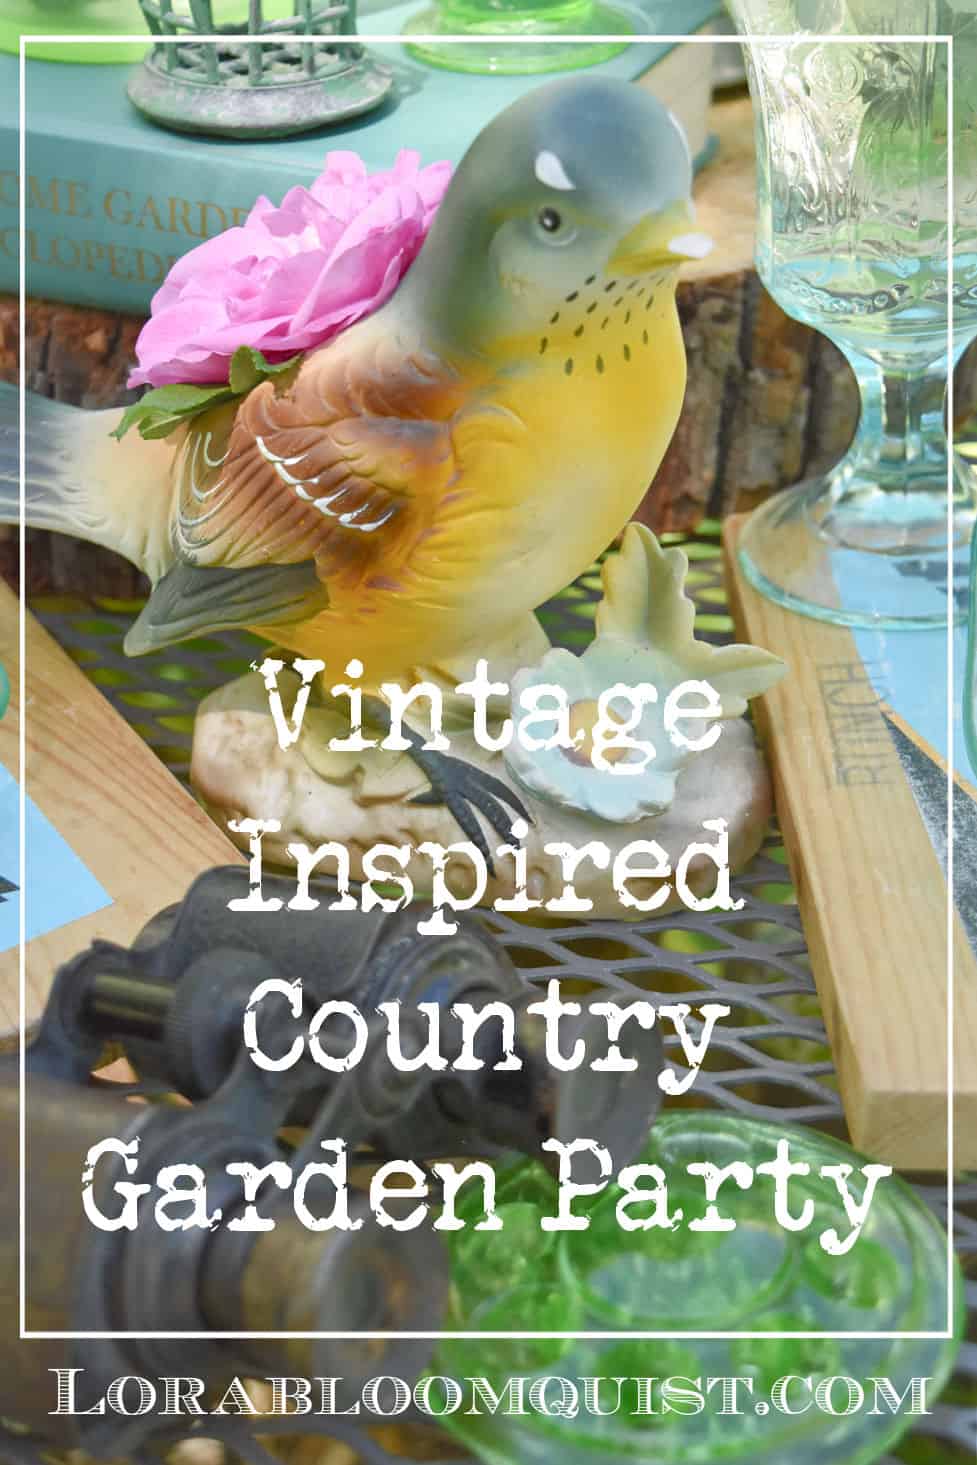 Garden Party with Green Depression Glass and Vintage Junk